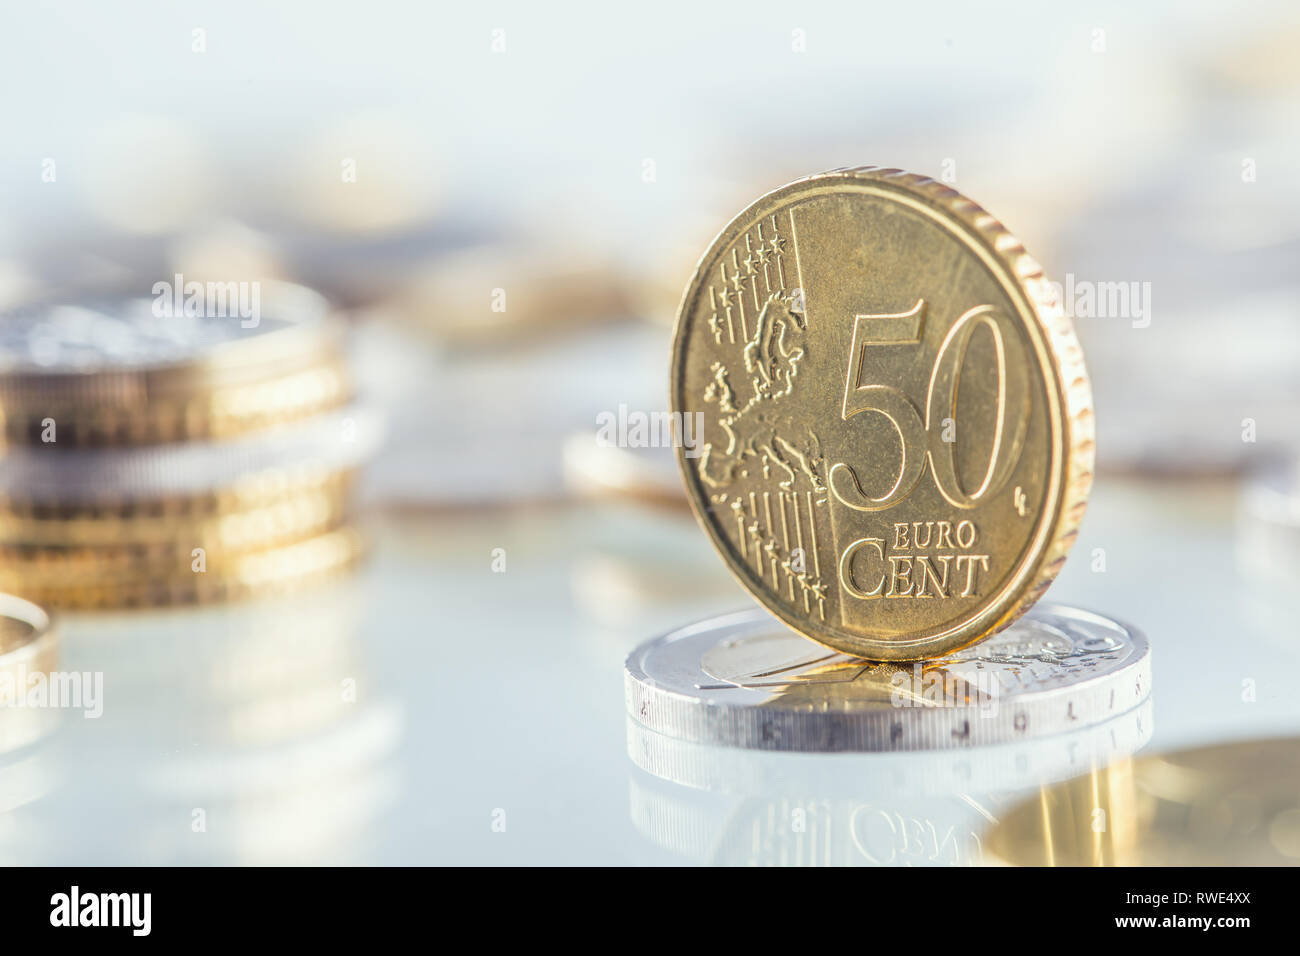 Euro coin balances on another coin and several loose coins Stock Photo